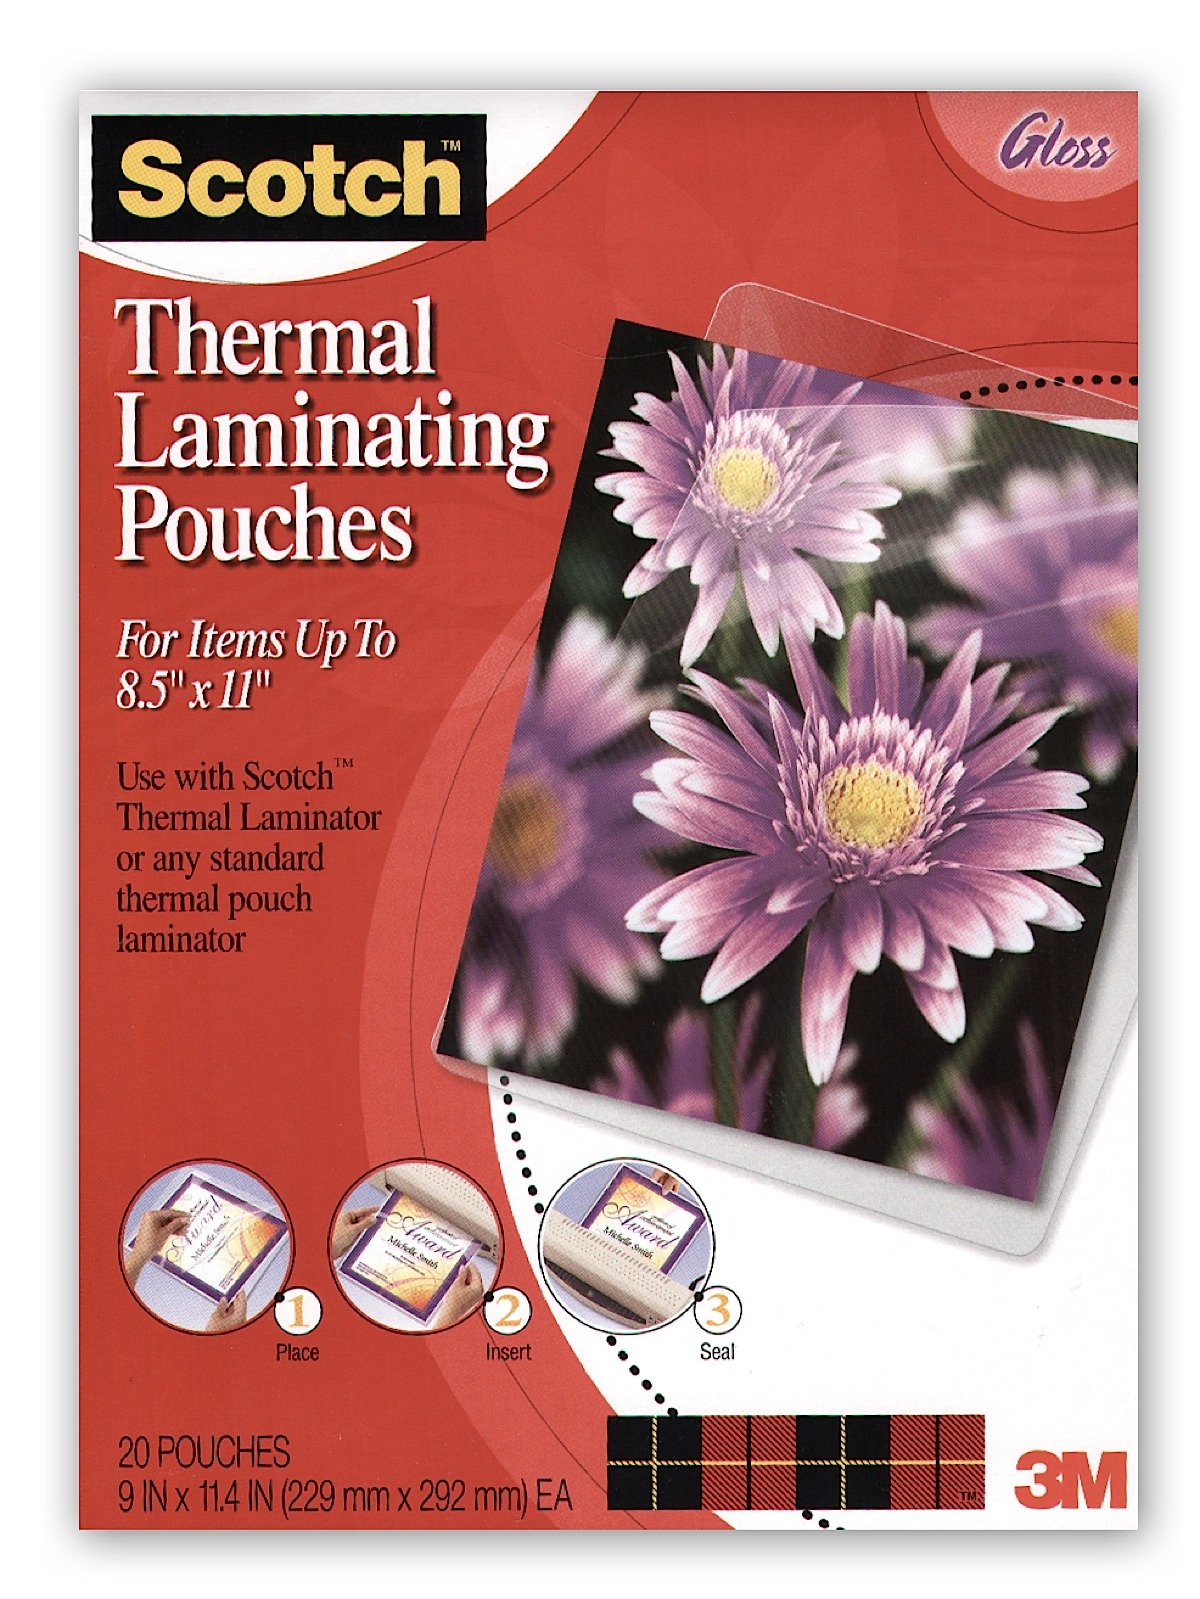 3M - Thermal Laminating Pouches